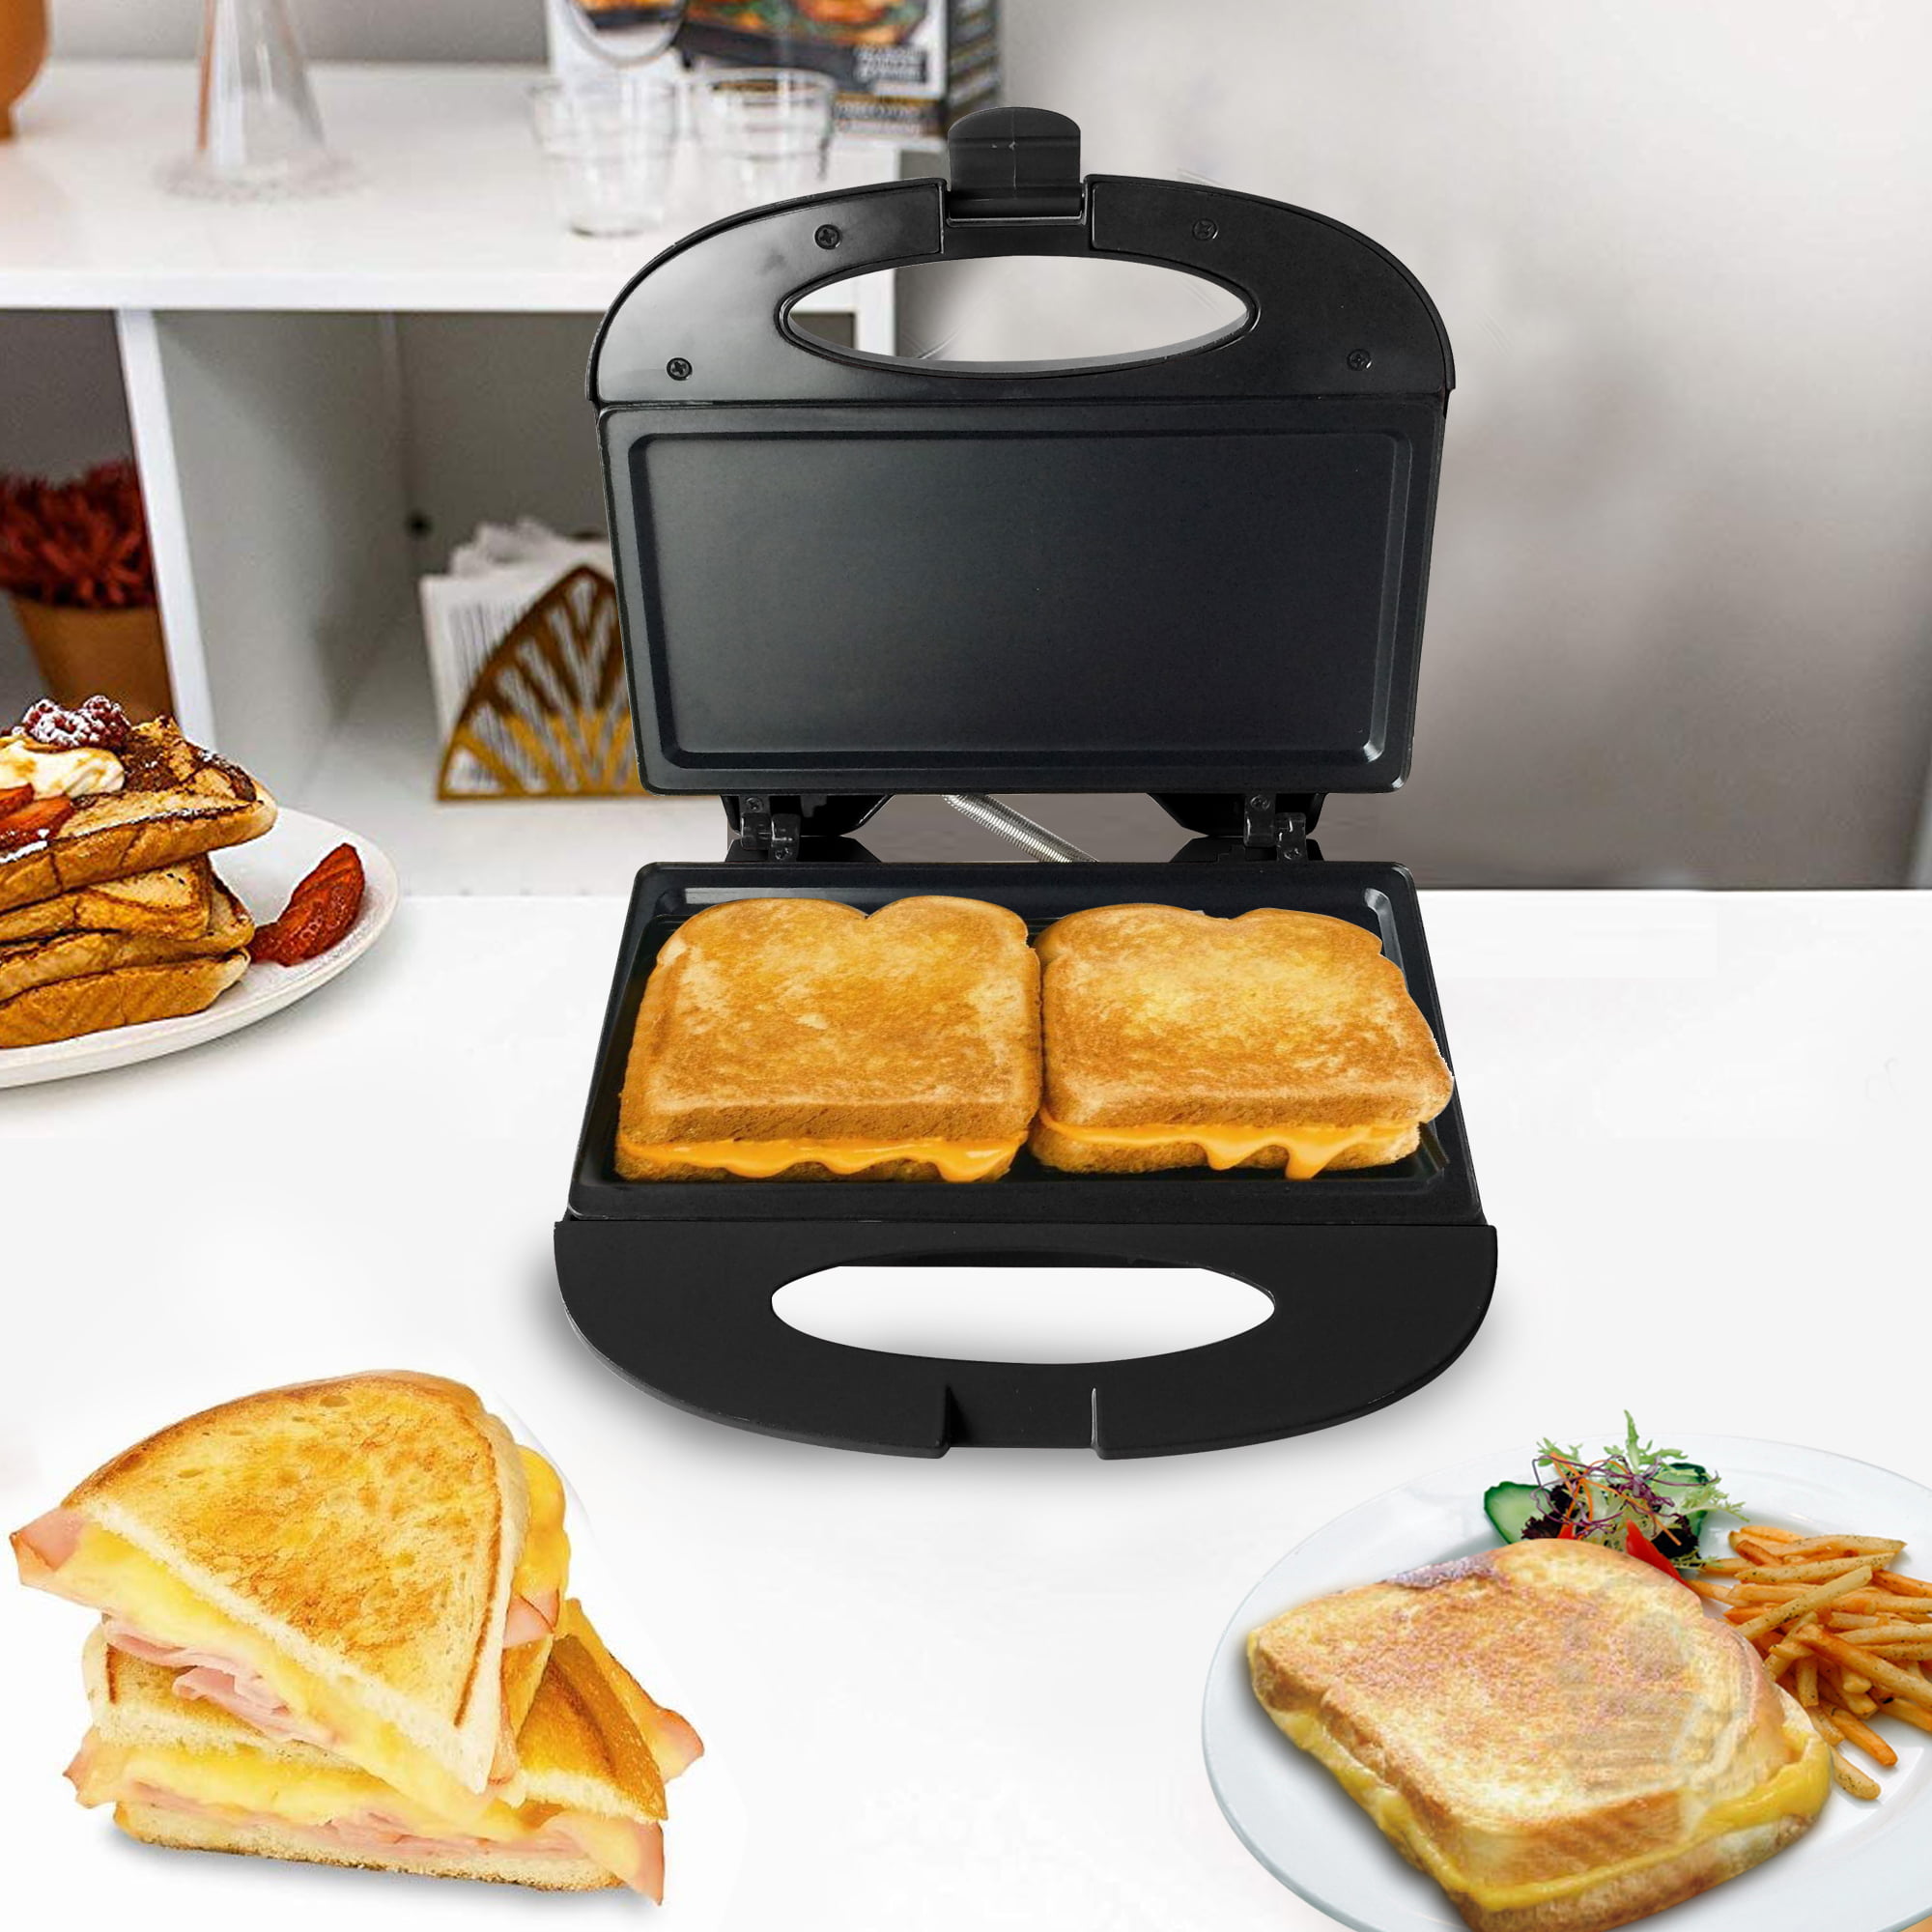 Bene Casa - White Nonstick Flat Grill Sandwich Maker - Includes Cool-touch  Handles and Die Cast Aluminum Cooking Surface